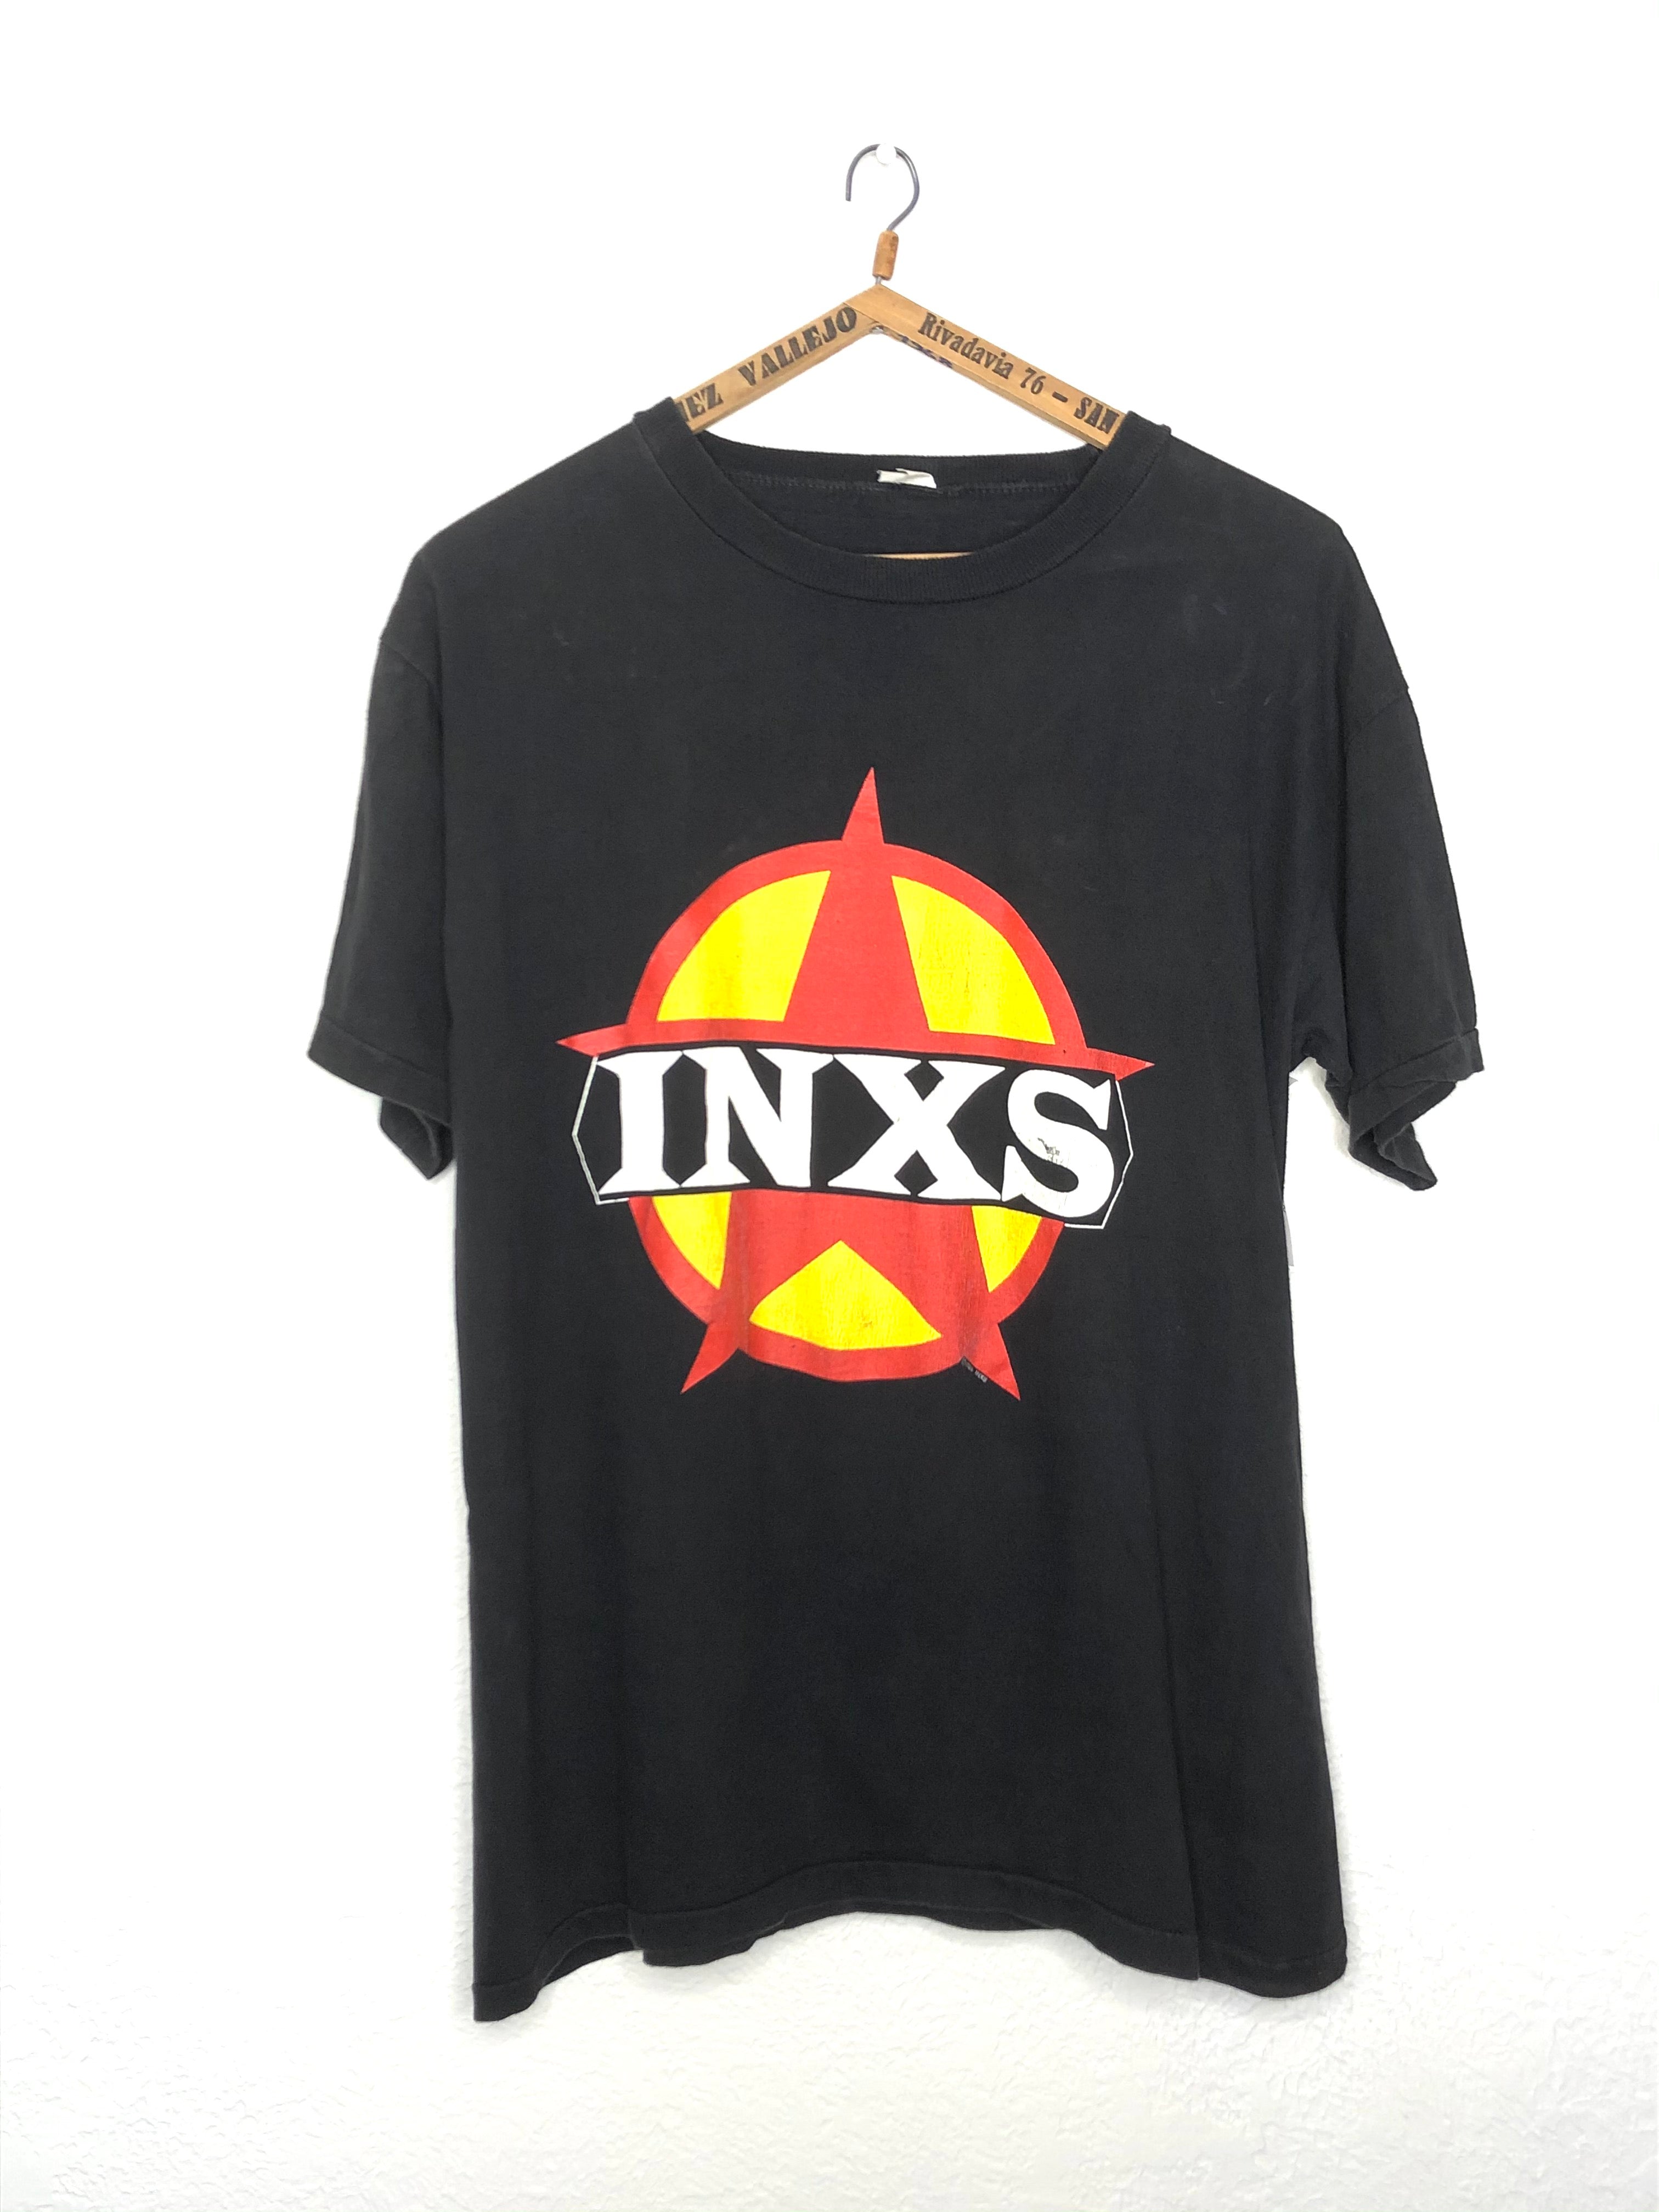 Collector's Edition OG '88 INXS Calling All Tour Concert – The Vault